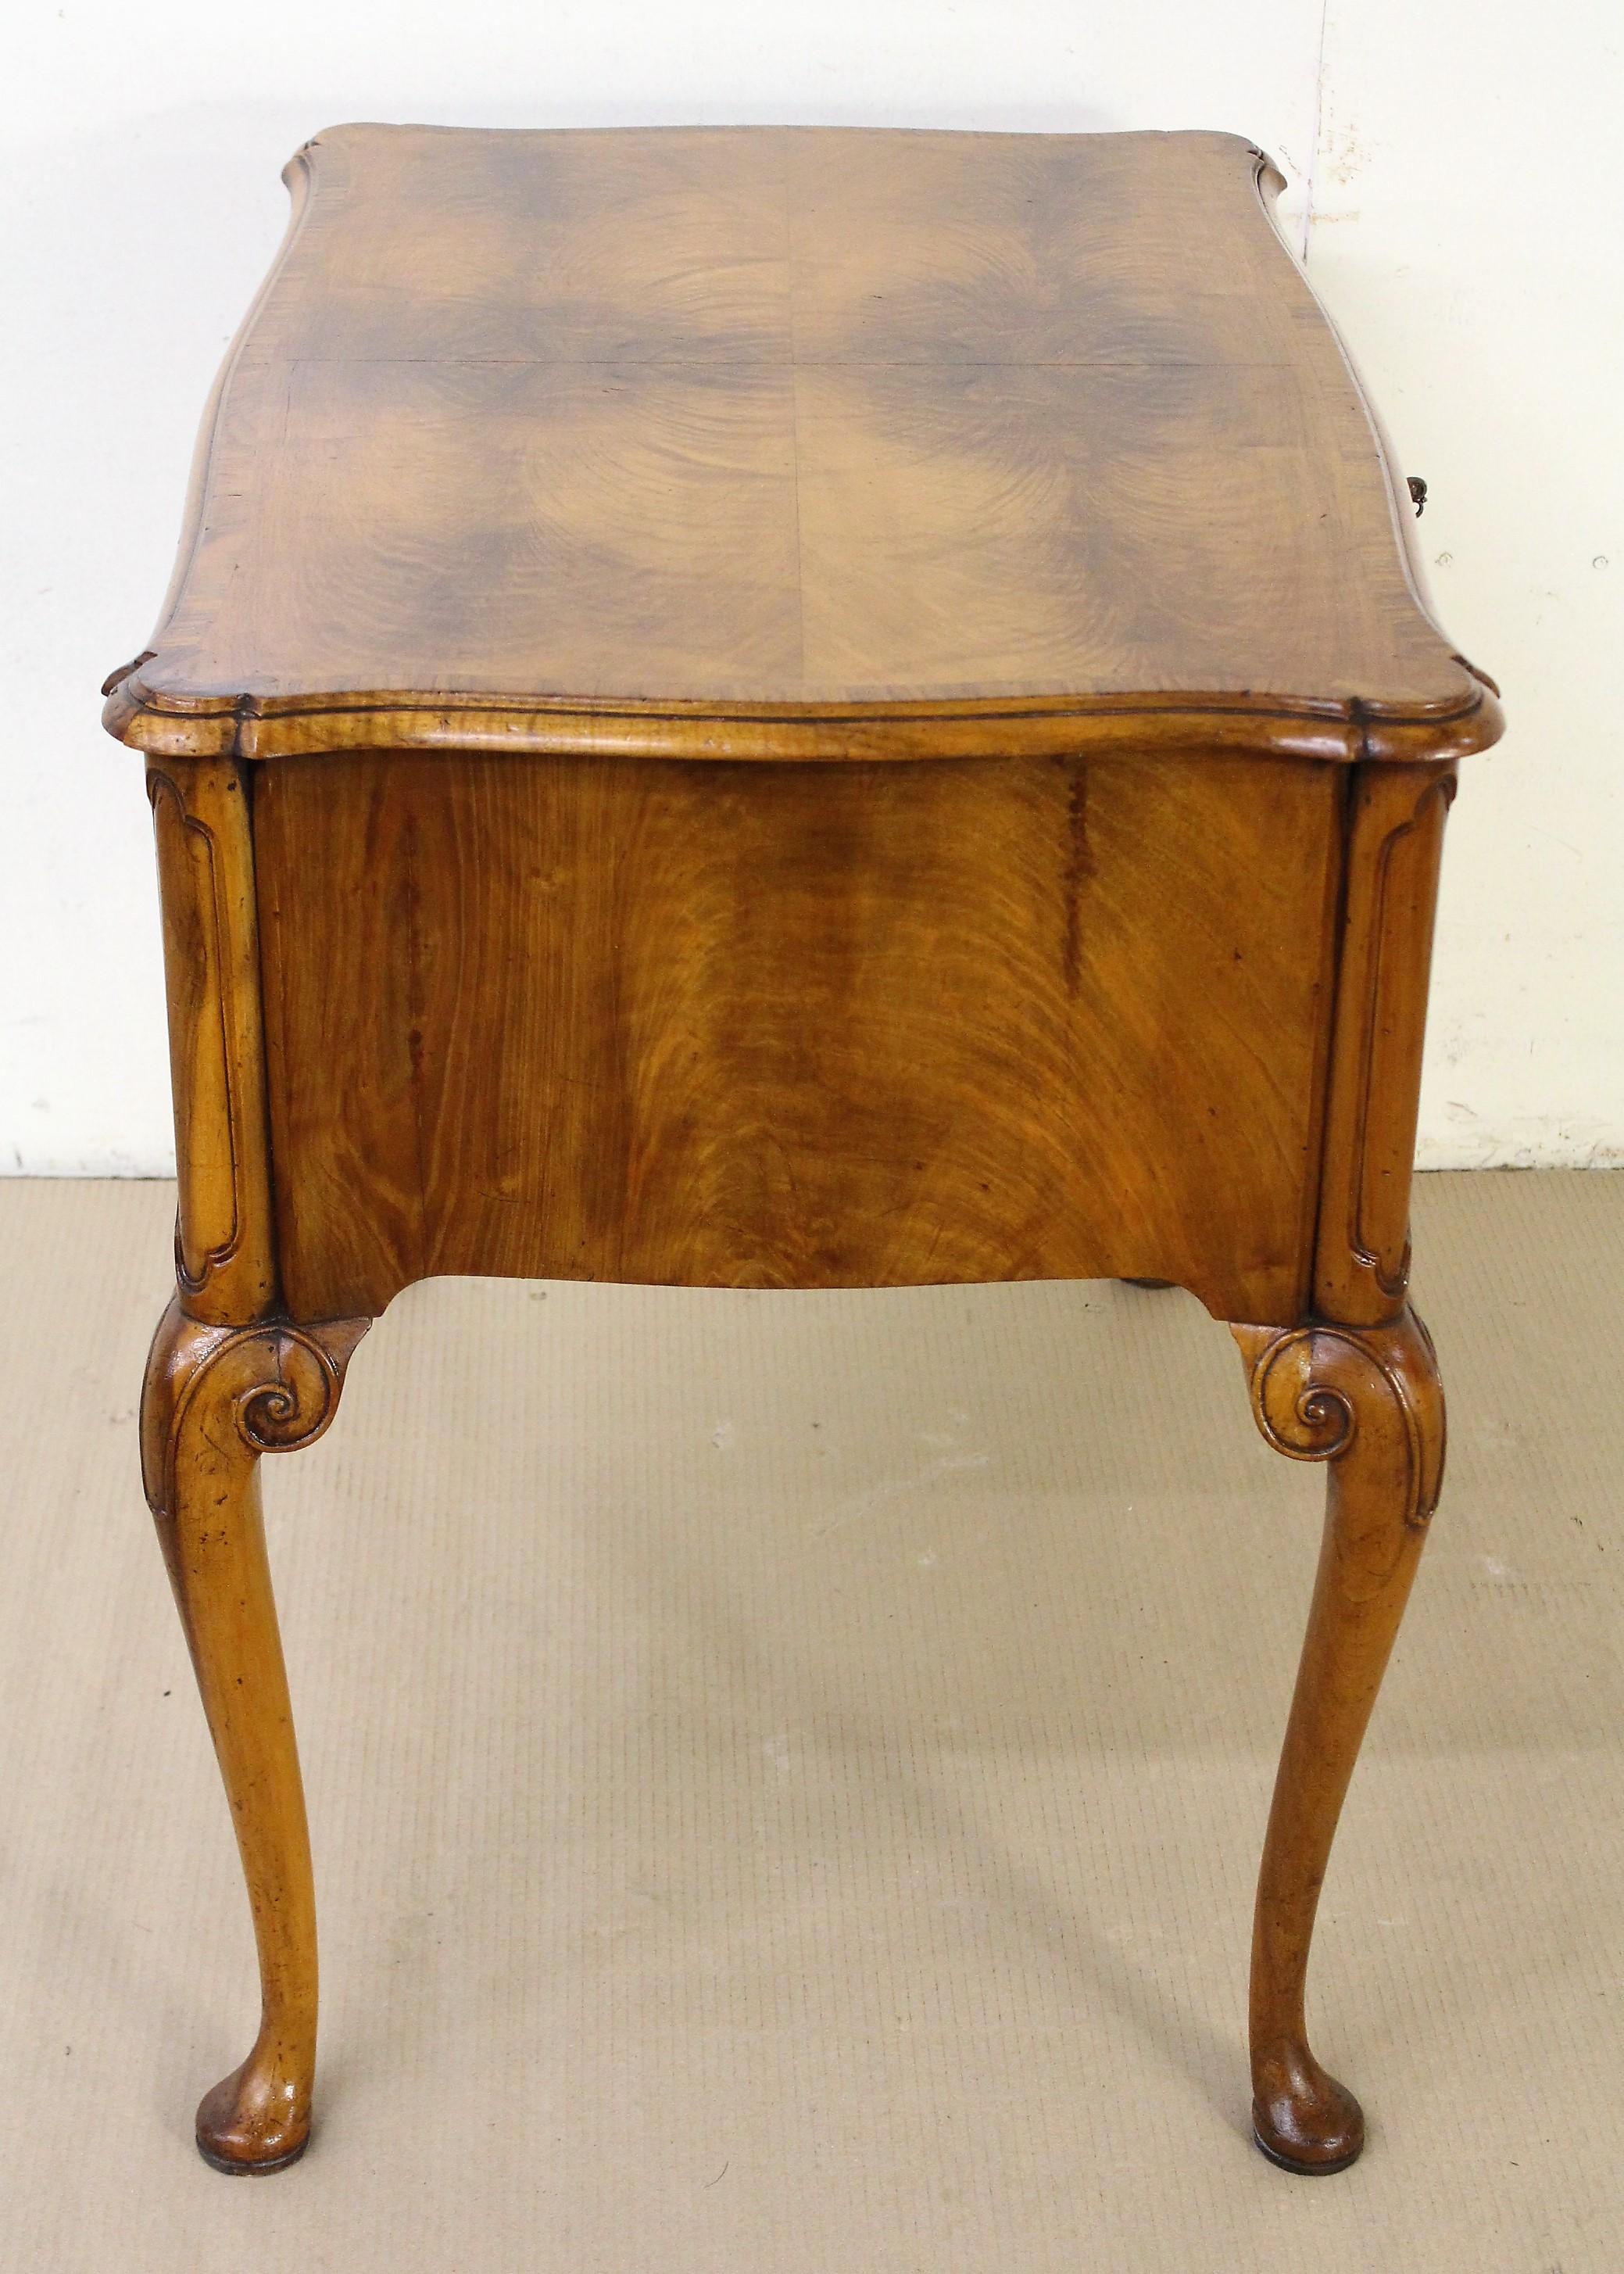 Edwardian Period Burr Walnut Lamp Table In Good Condition For Sale In Poling, West Sussex